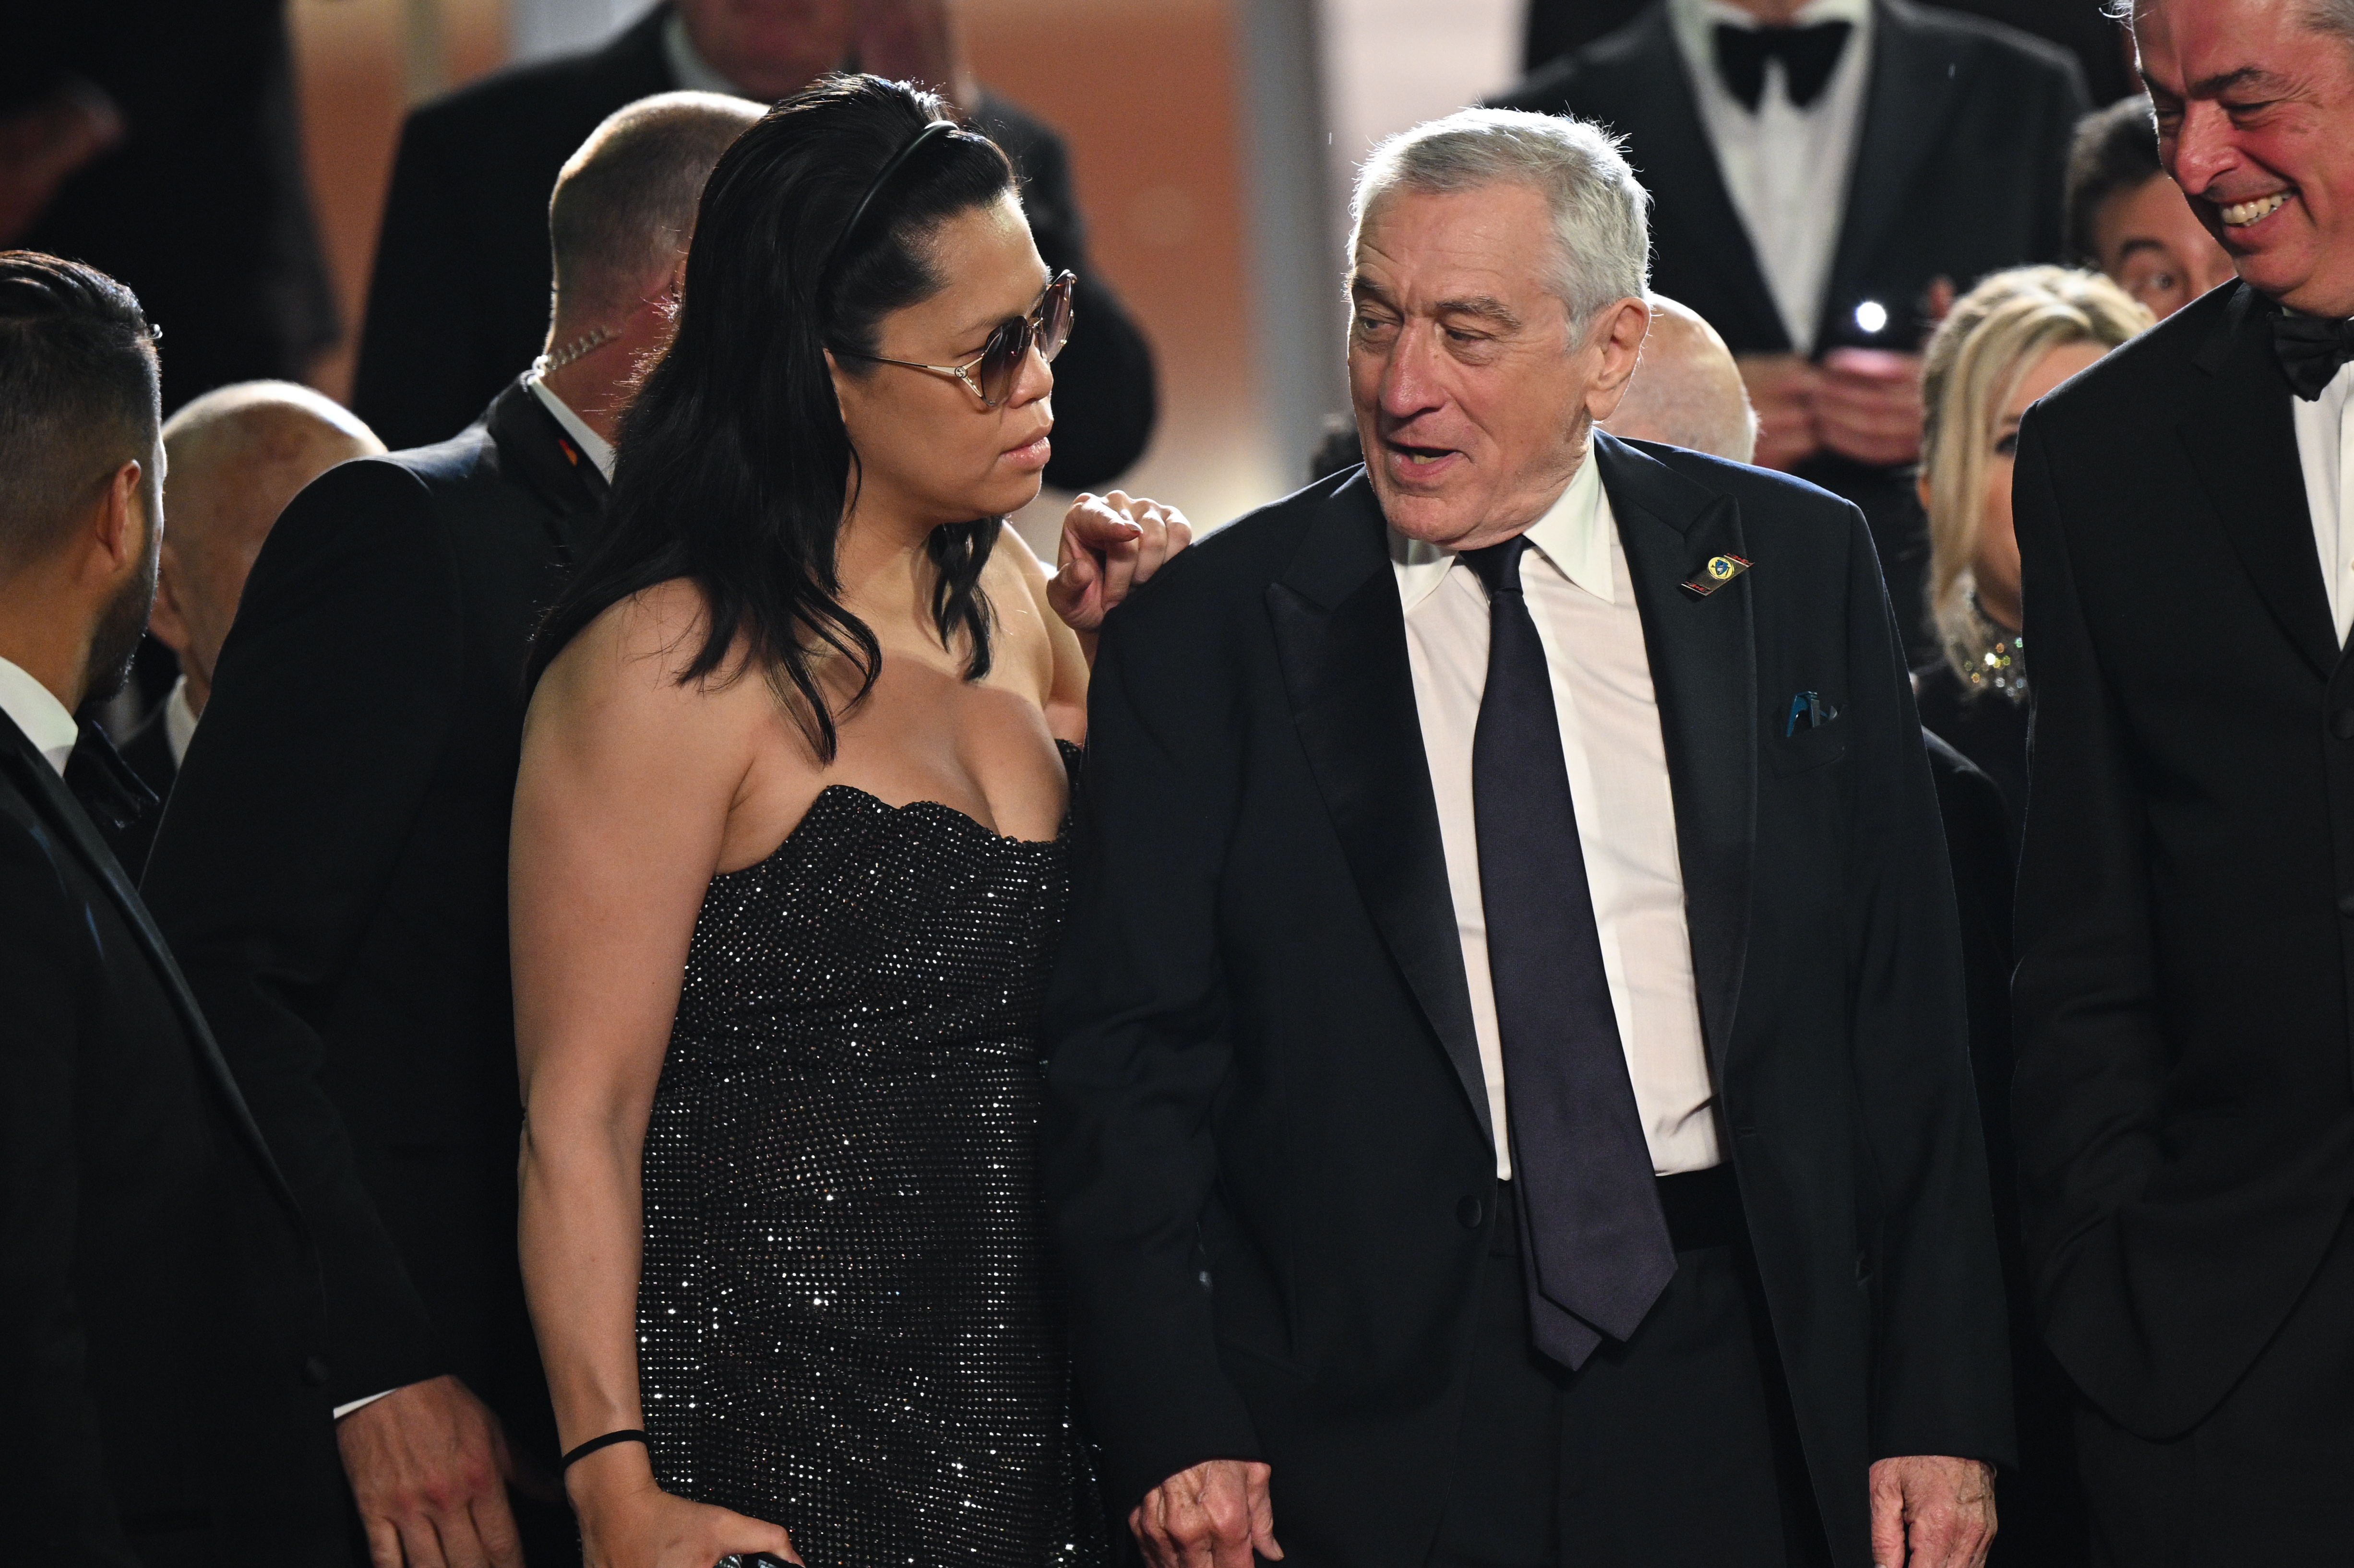 Tiffany Chen and Robert De Niro in Cannes, France on May 20, 2023 | Source: Getty Images